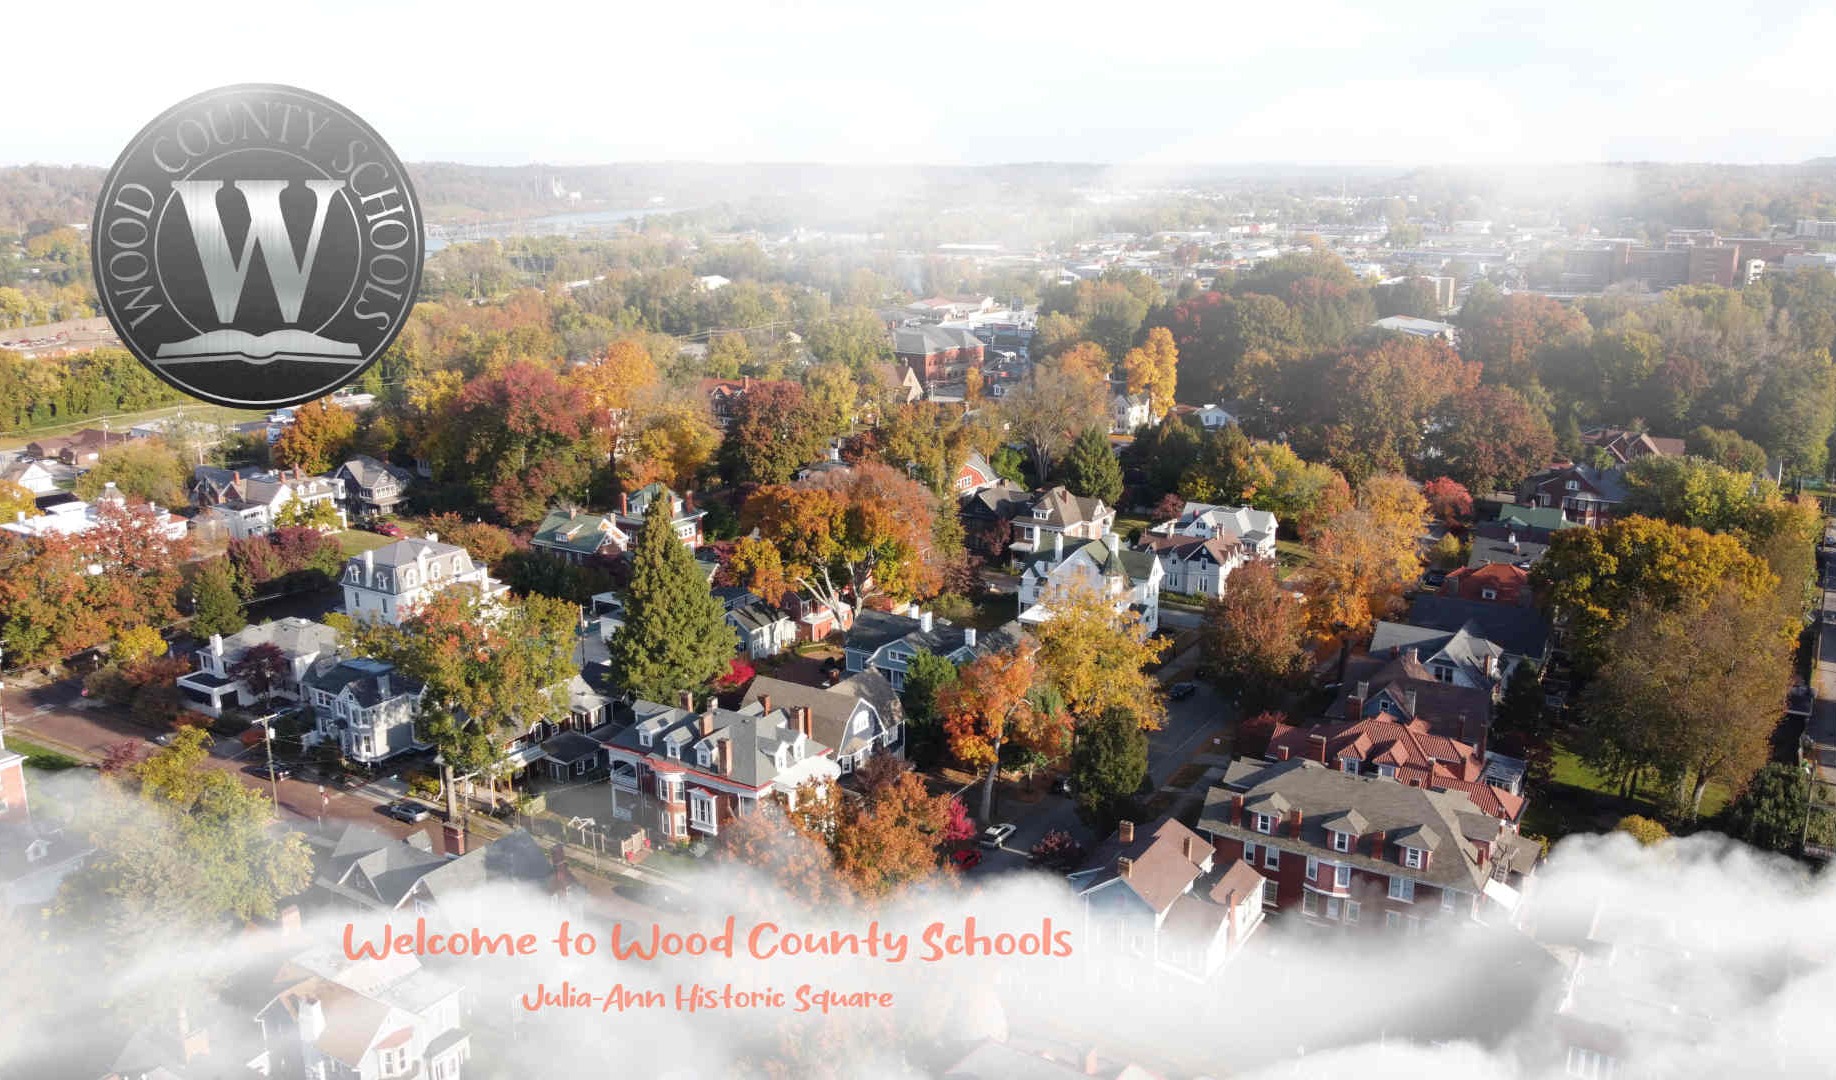 welcome to wcs - aerial view of julia-ann square in autumn with autumn-colored trees